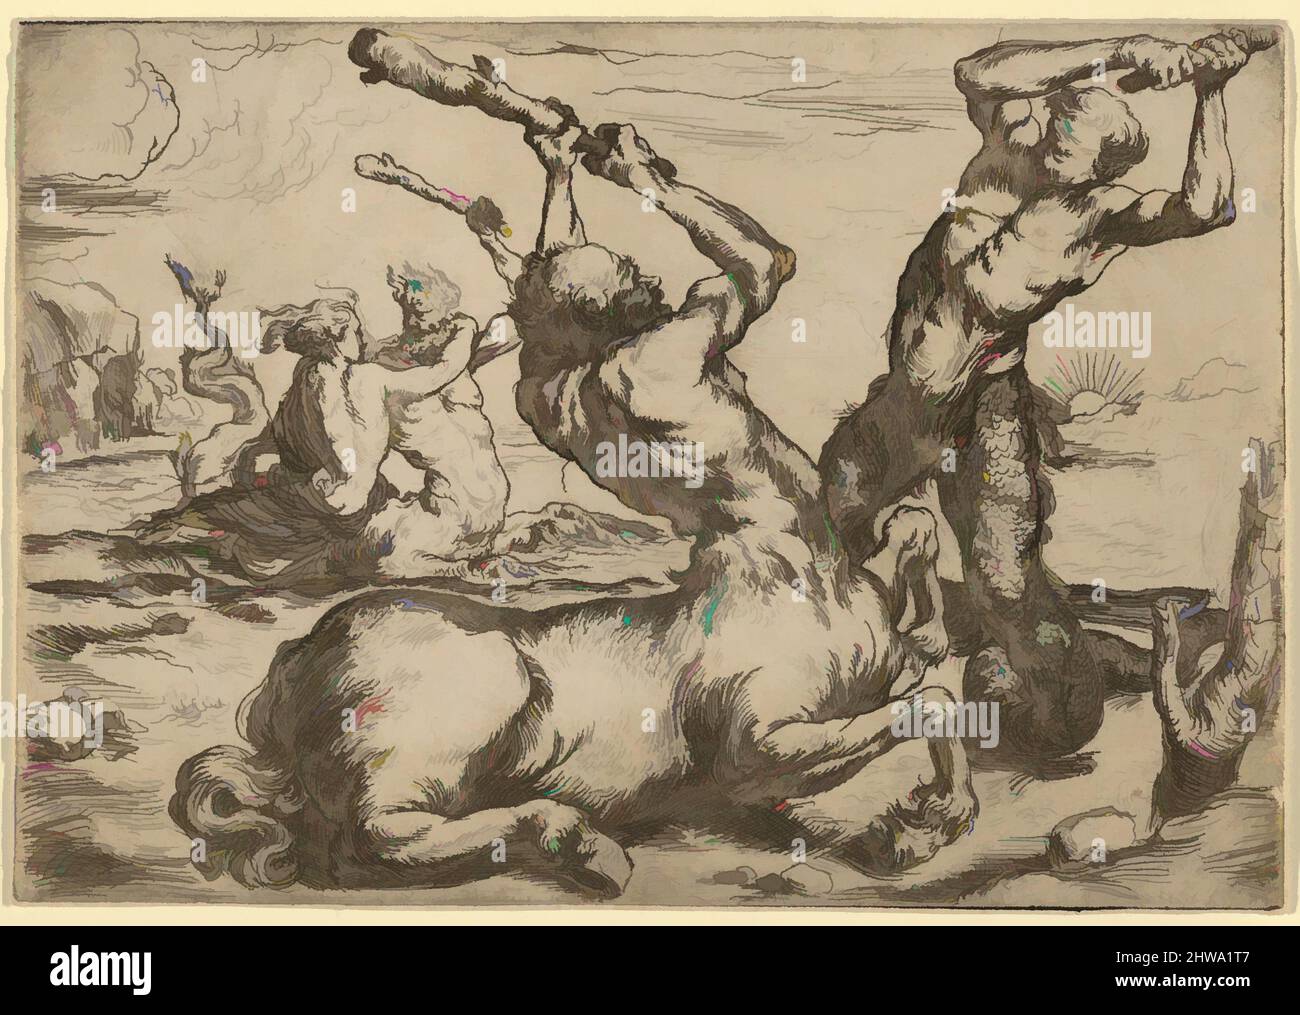 Art inspired by Drawings and Prints, Battle Between a Centaur and a Triton with a Triton, Artist, Formerly attributed to, Jusepe de Ribera, Classic works modernized by Artotop with a splash of modernity. Shapes, color and value, eye-catching visual impact on art. Emotions through freedom of artworks in a contemporary way. A timeless message pursuing a wildly creative new direction. Artists turning to the digital medium and creating the Artotop NFT Stock Photo